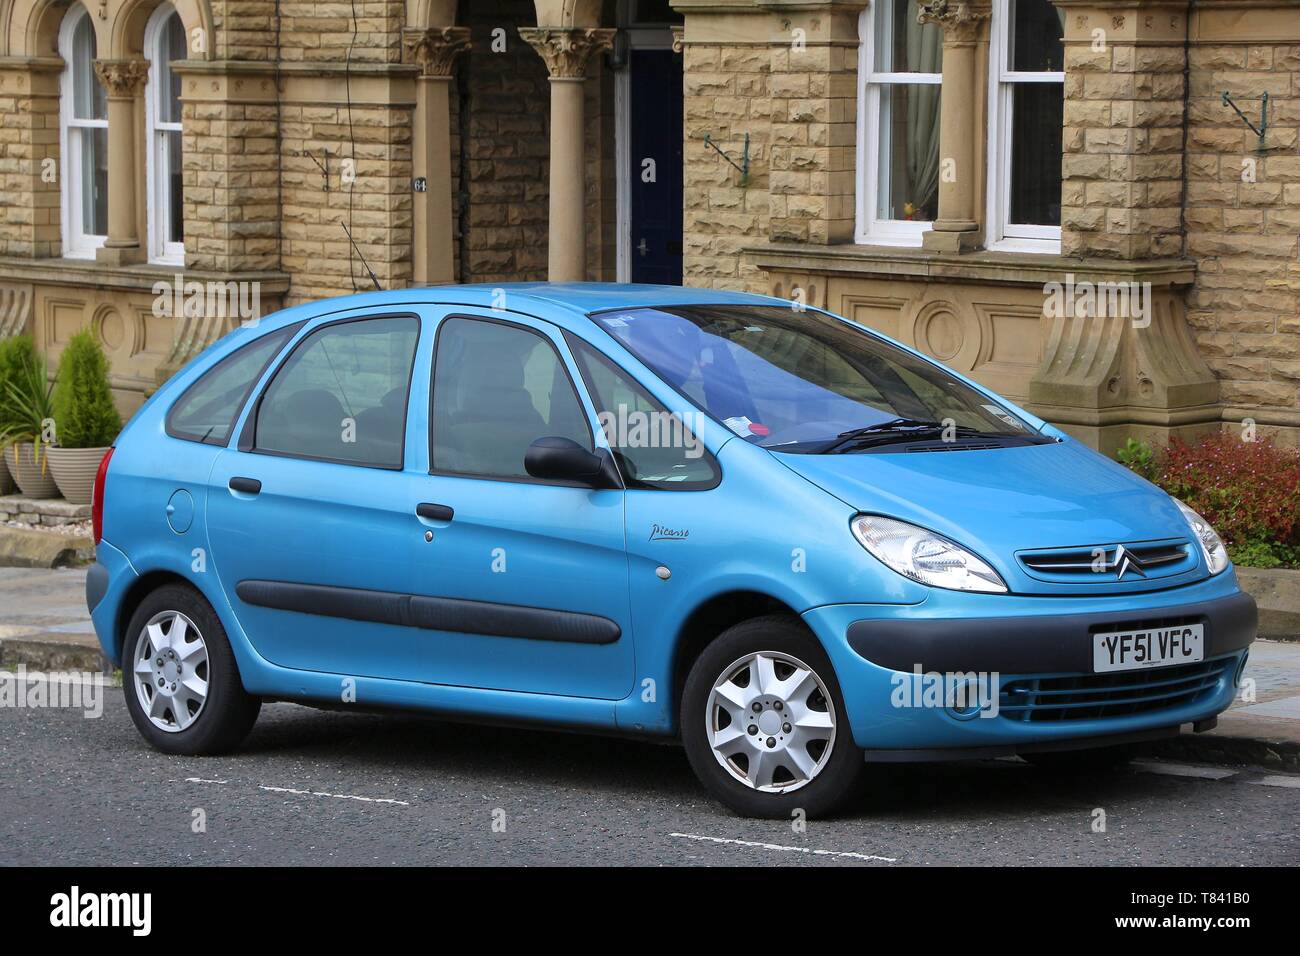 YORKSHIRE, UK - JULY 11, 2016: Citroen Xsara Picasso compact MPV car parked in Saltaire, Yorkshire, UK. Citroen is part of PSA group. PSA manufactured Stock Photo